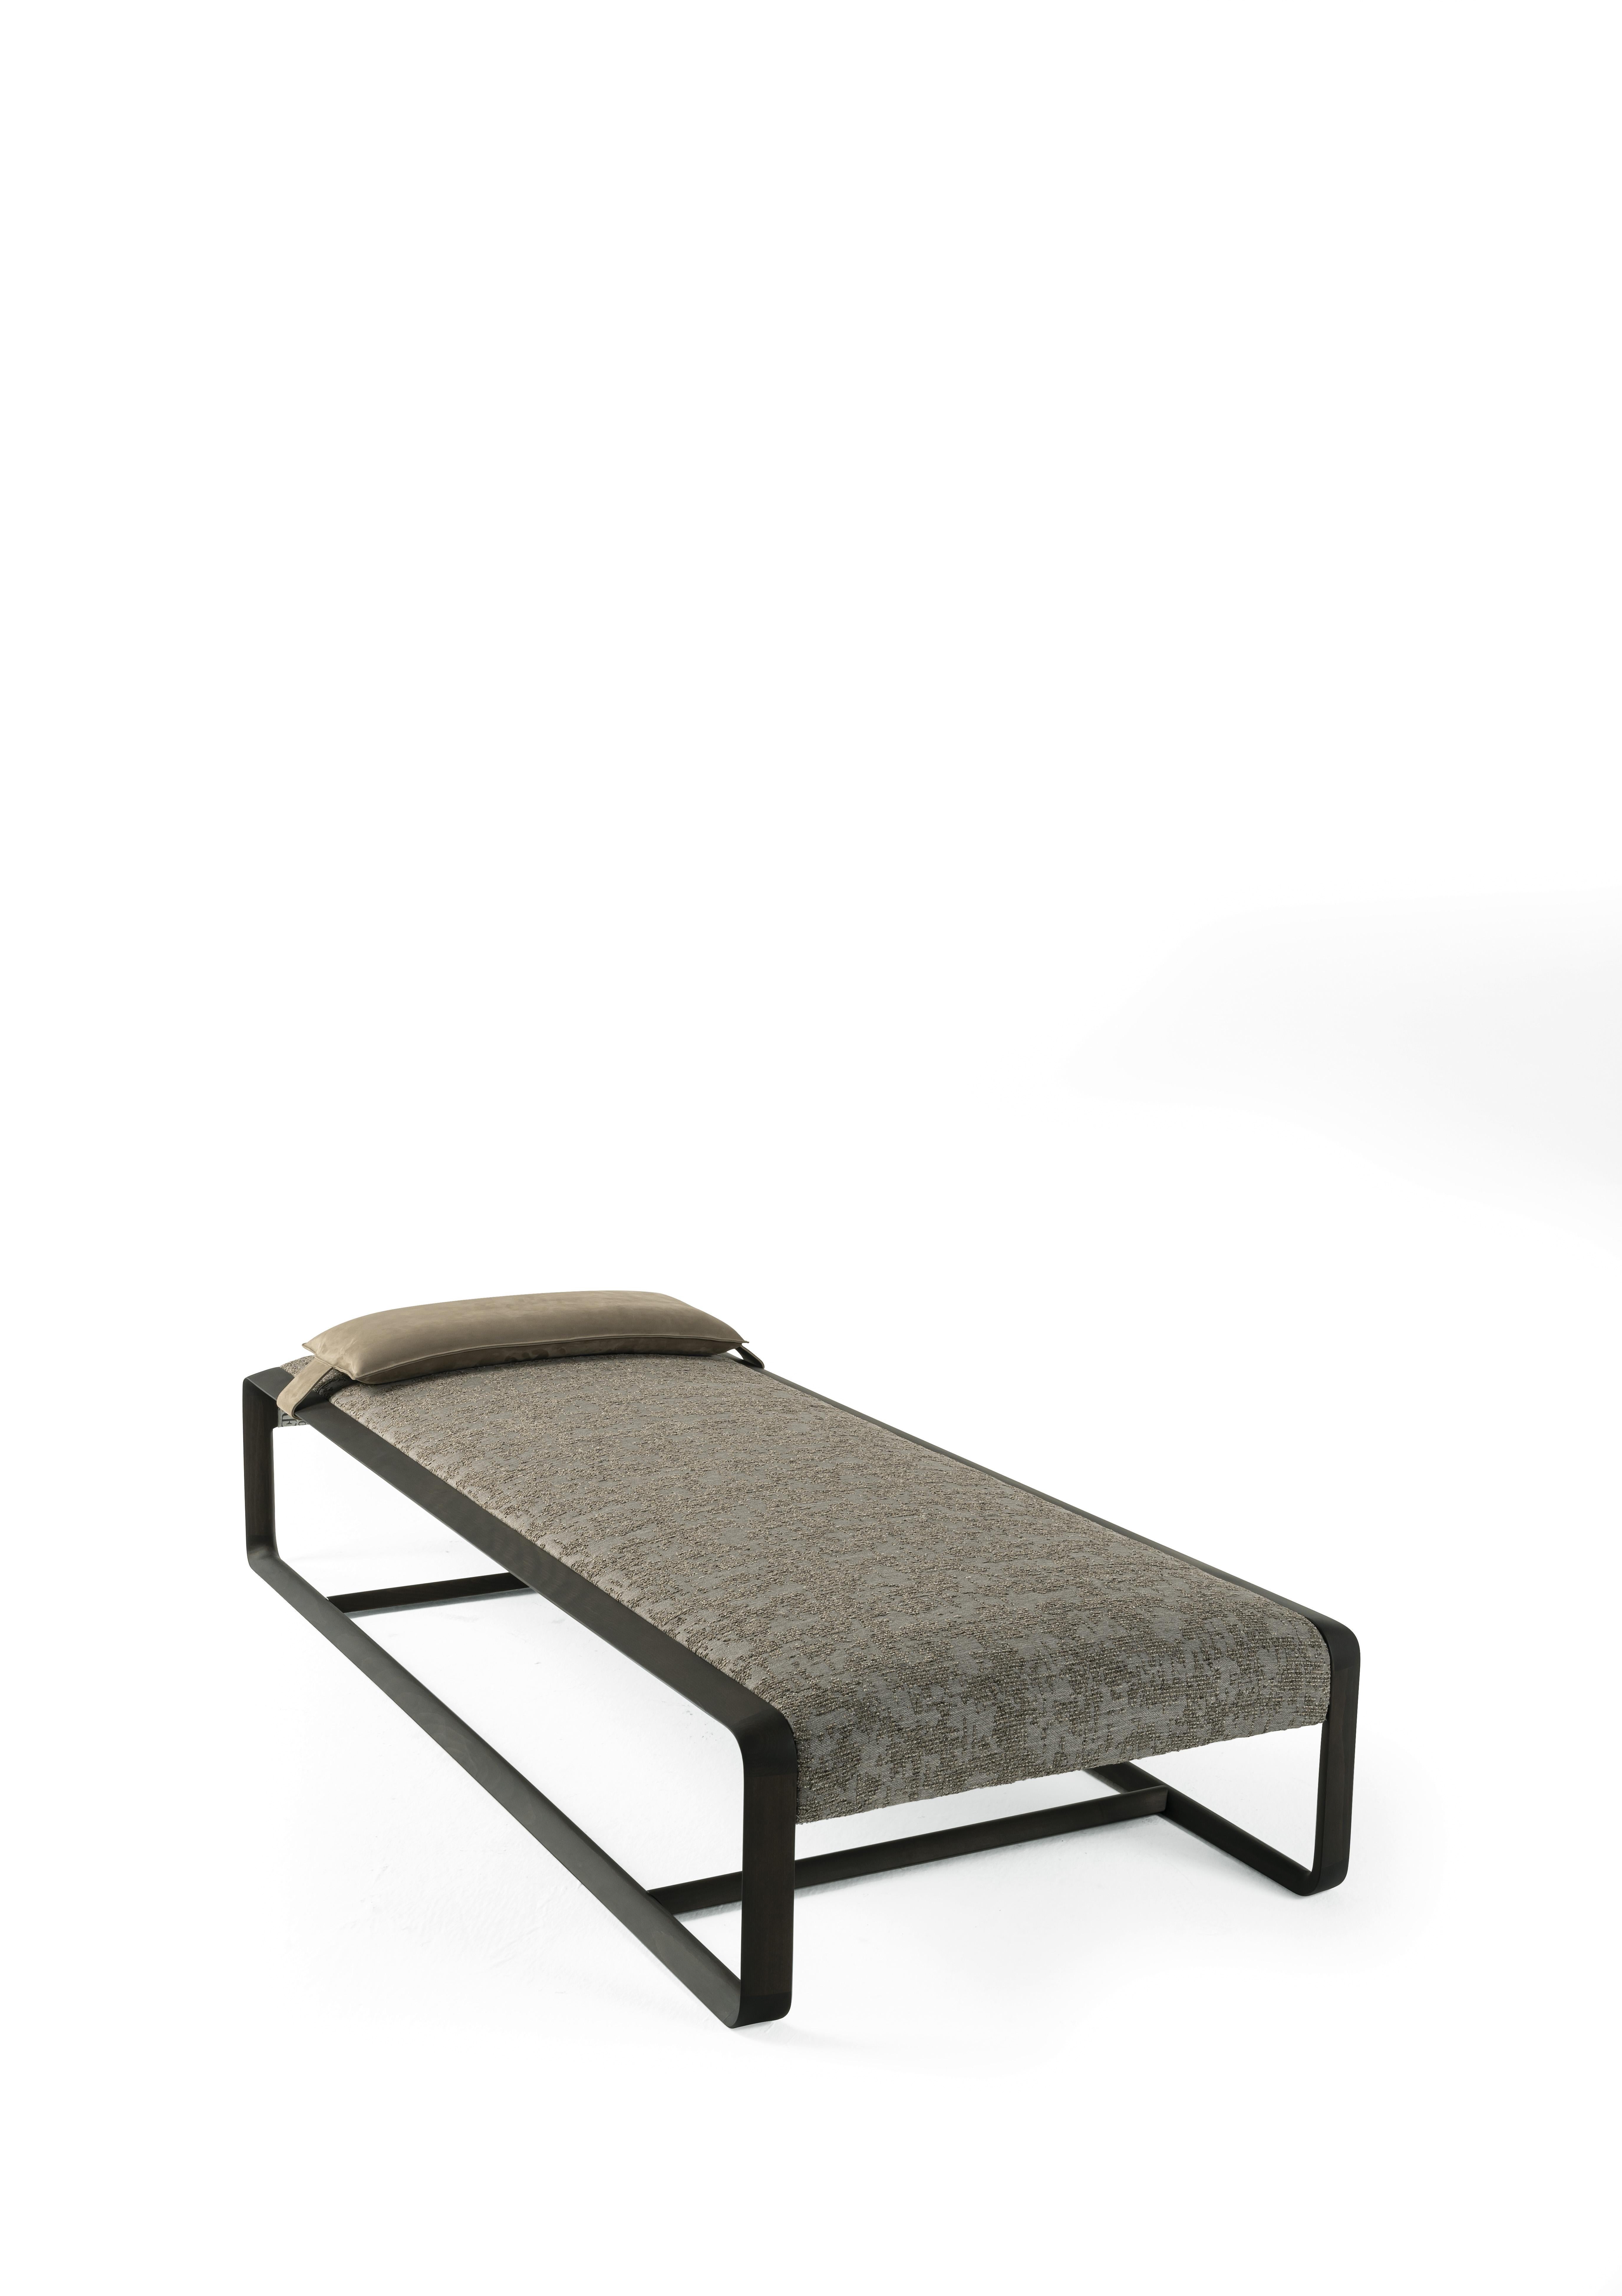 With its minimal-chic design, Wynwood daybed offers an additional seat and becomes, when necessary, a dividing element between different rooms. Able to combine aesthetics and comfort, the piece of furniture boasts a thin line enhanced by the gray